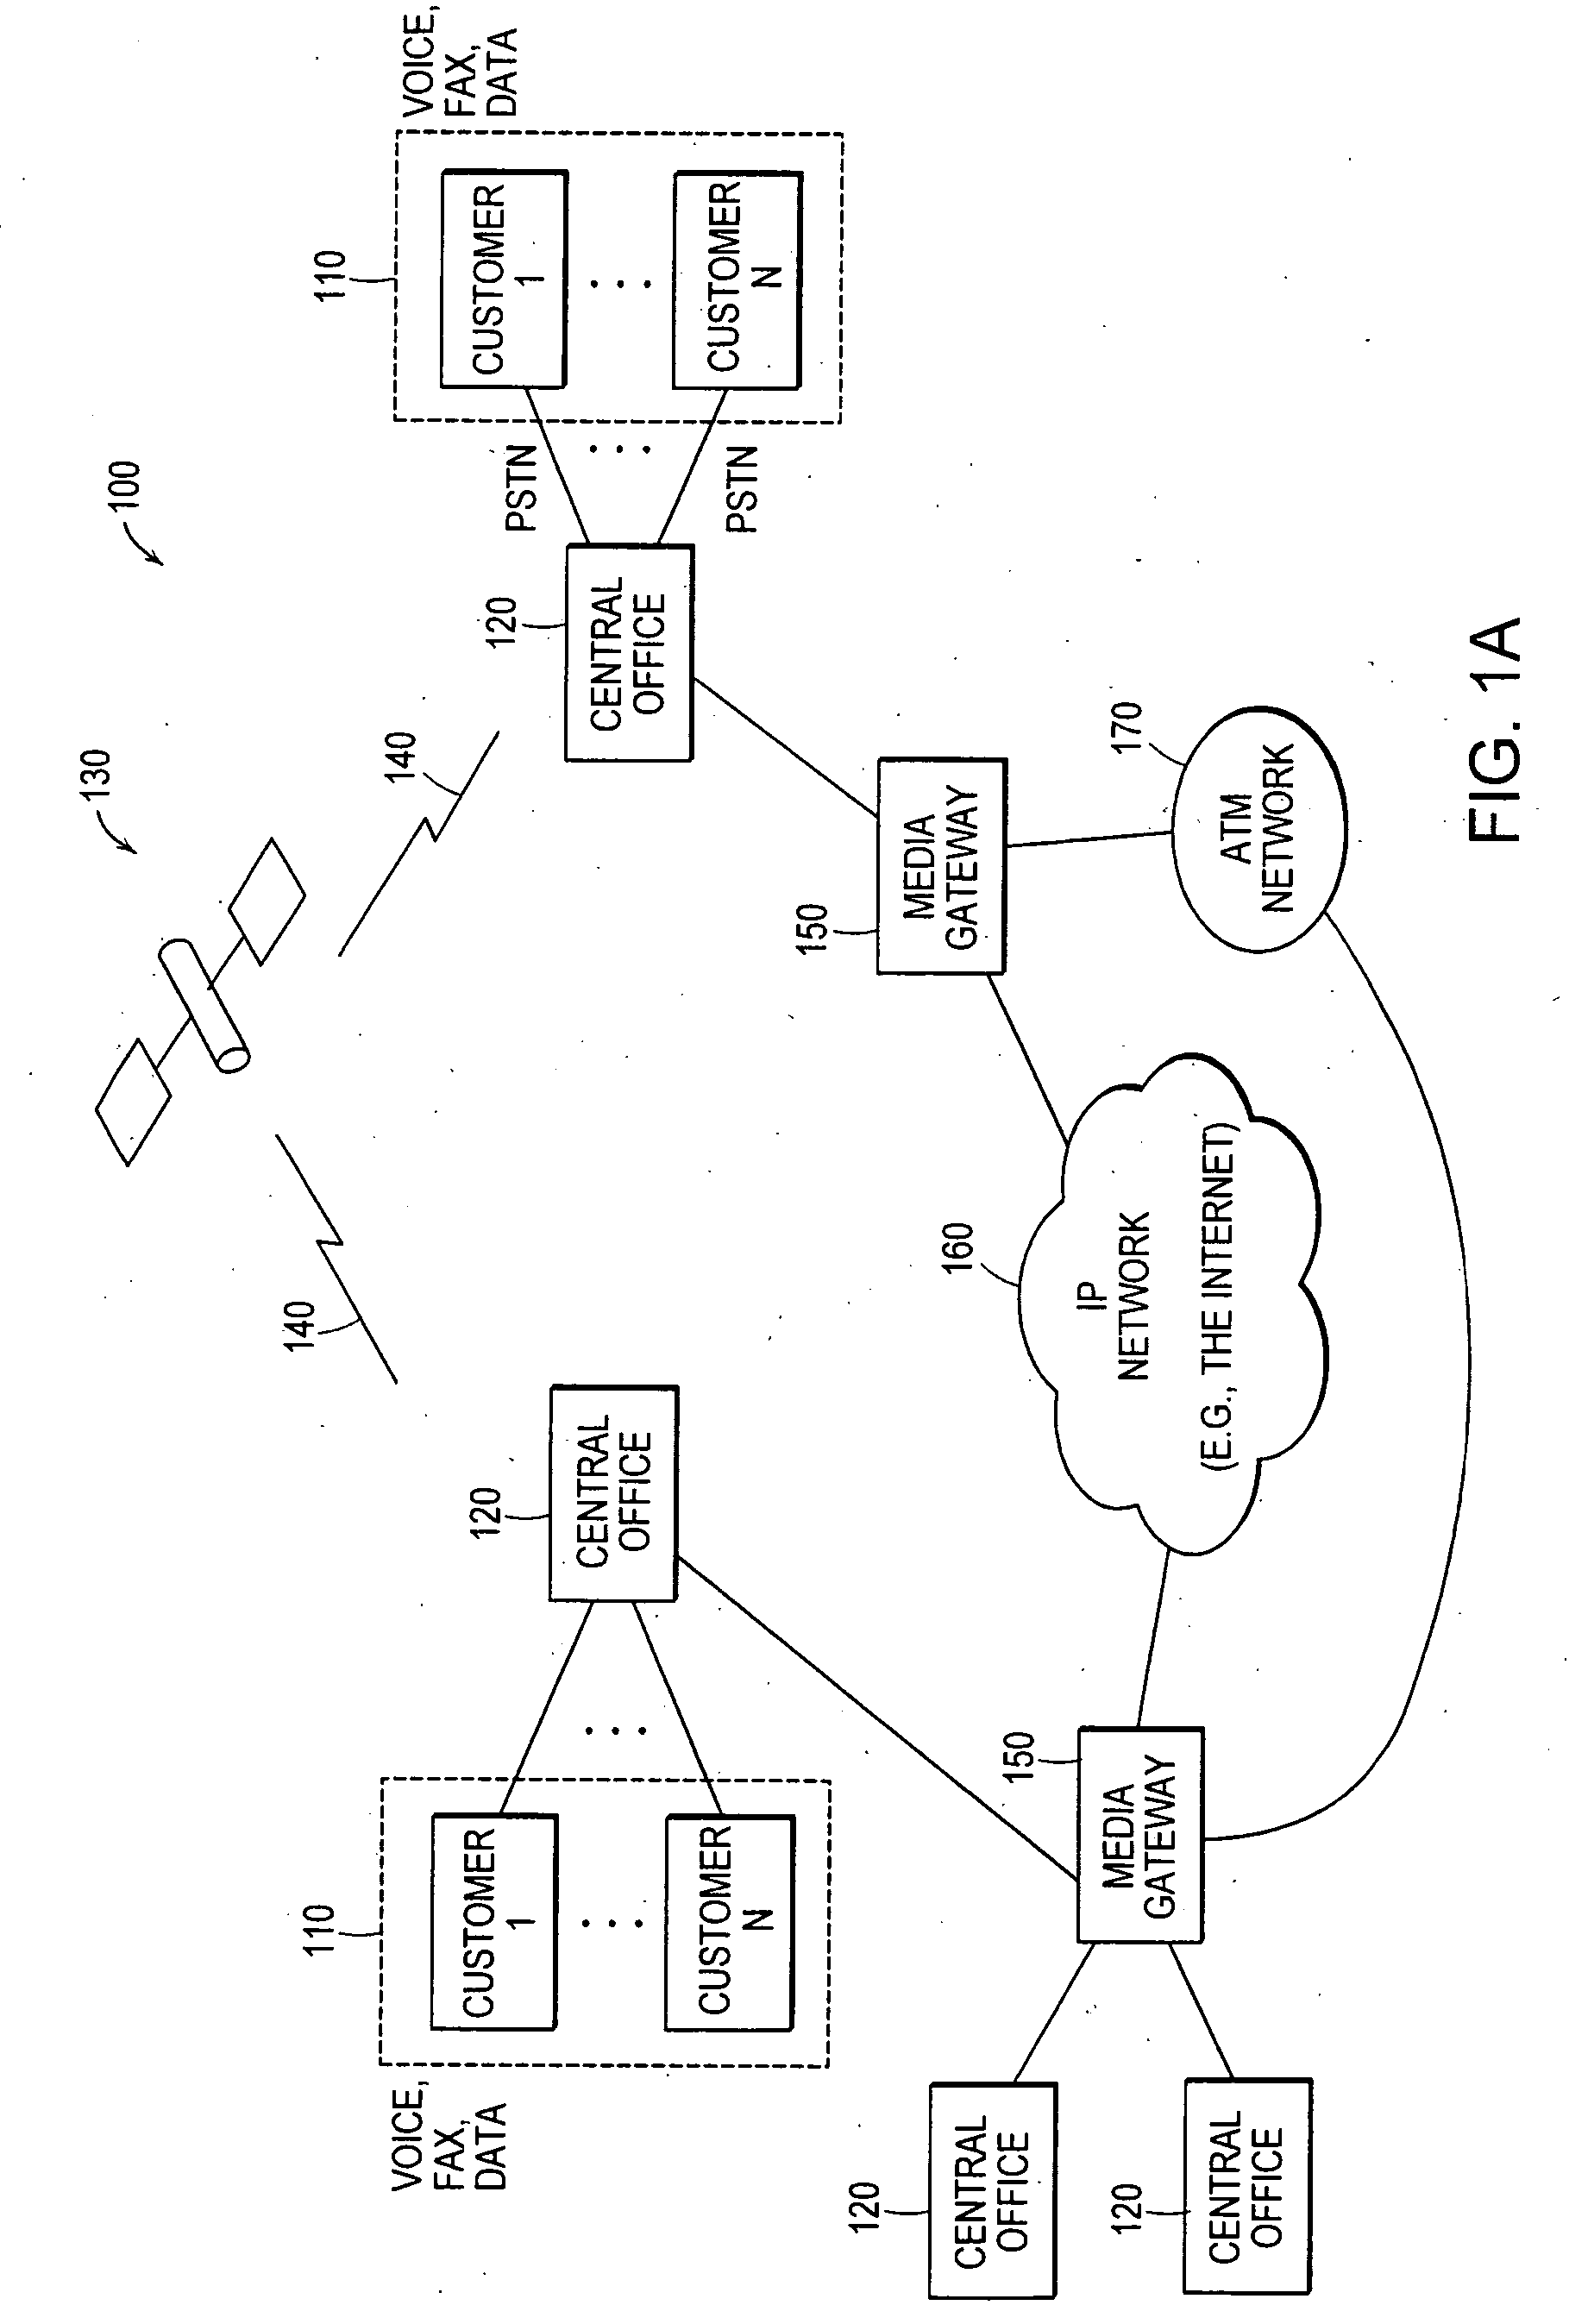 Method and apparatus for performing high-density DTMF, MF-R1, MF-R2 detection